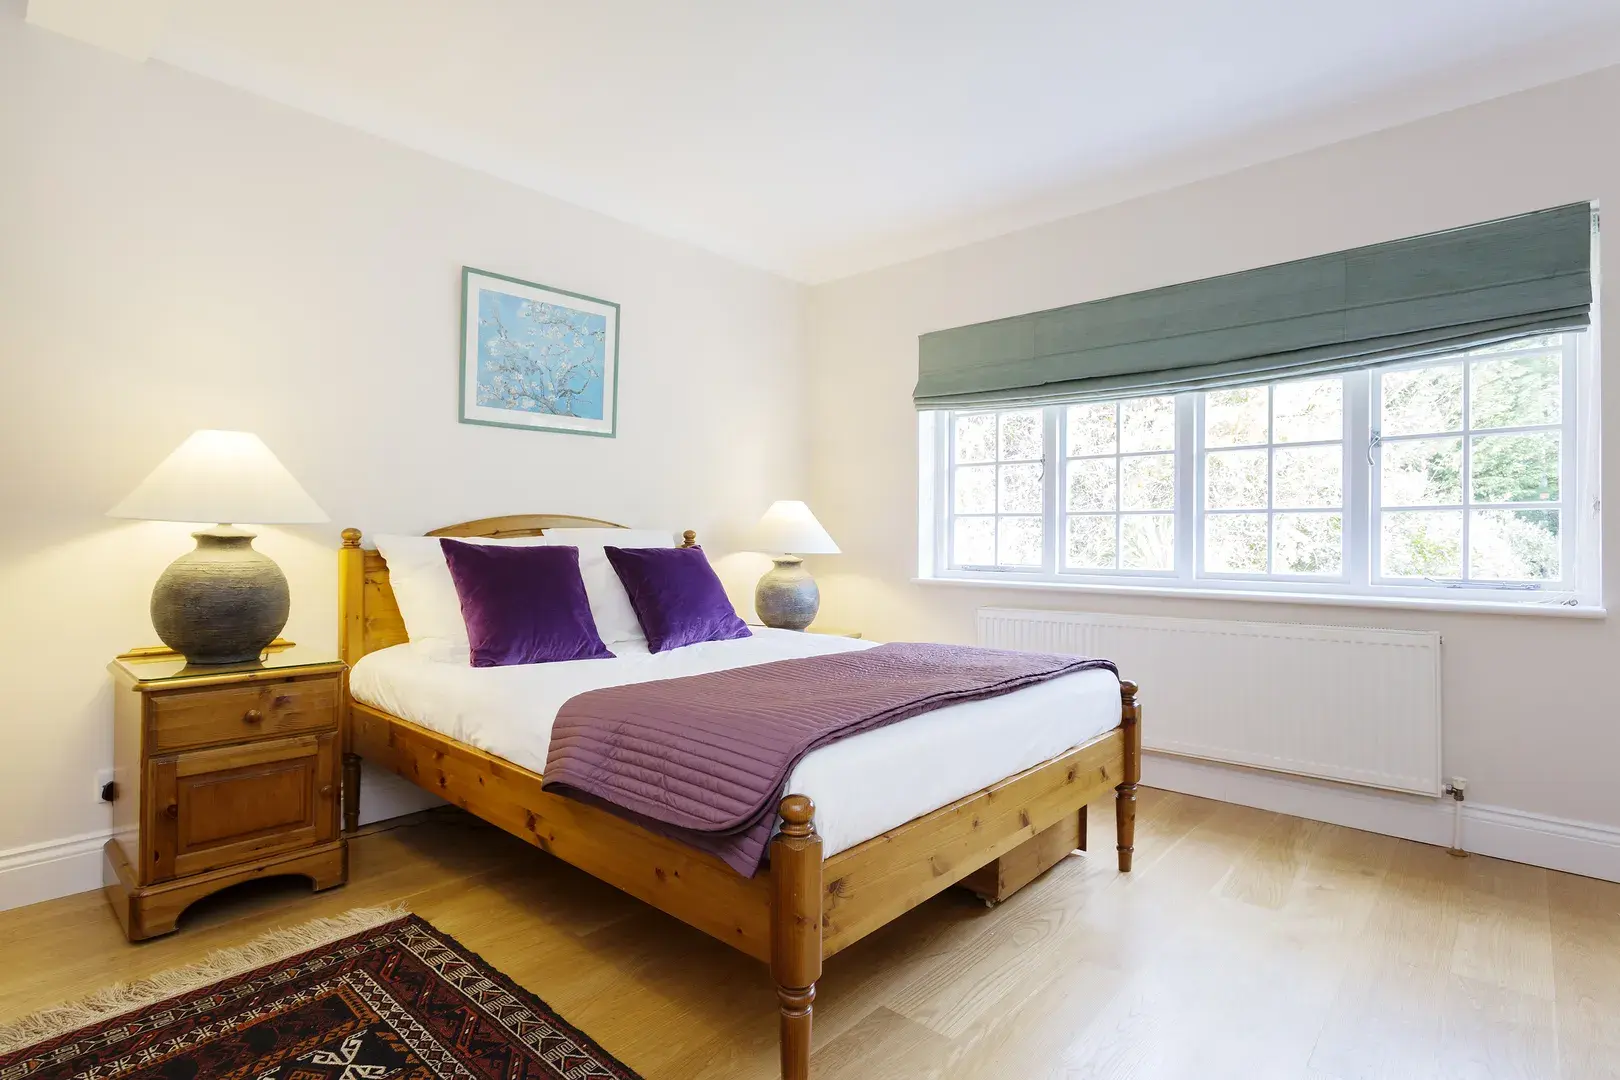 Holly Lodge Estate, holiday home in Highgate, London